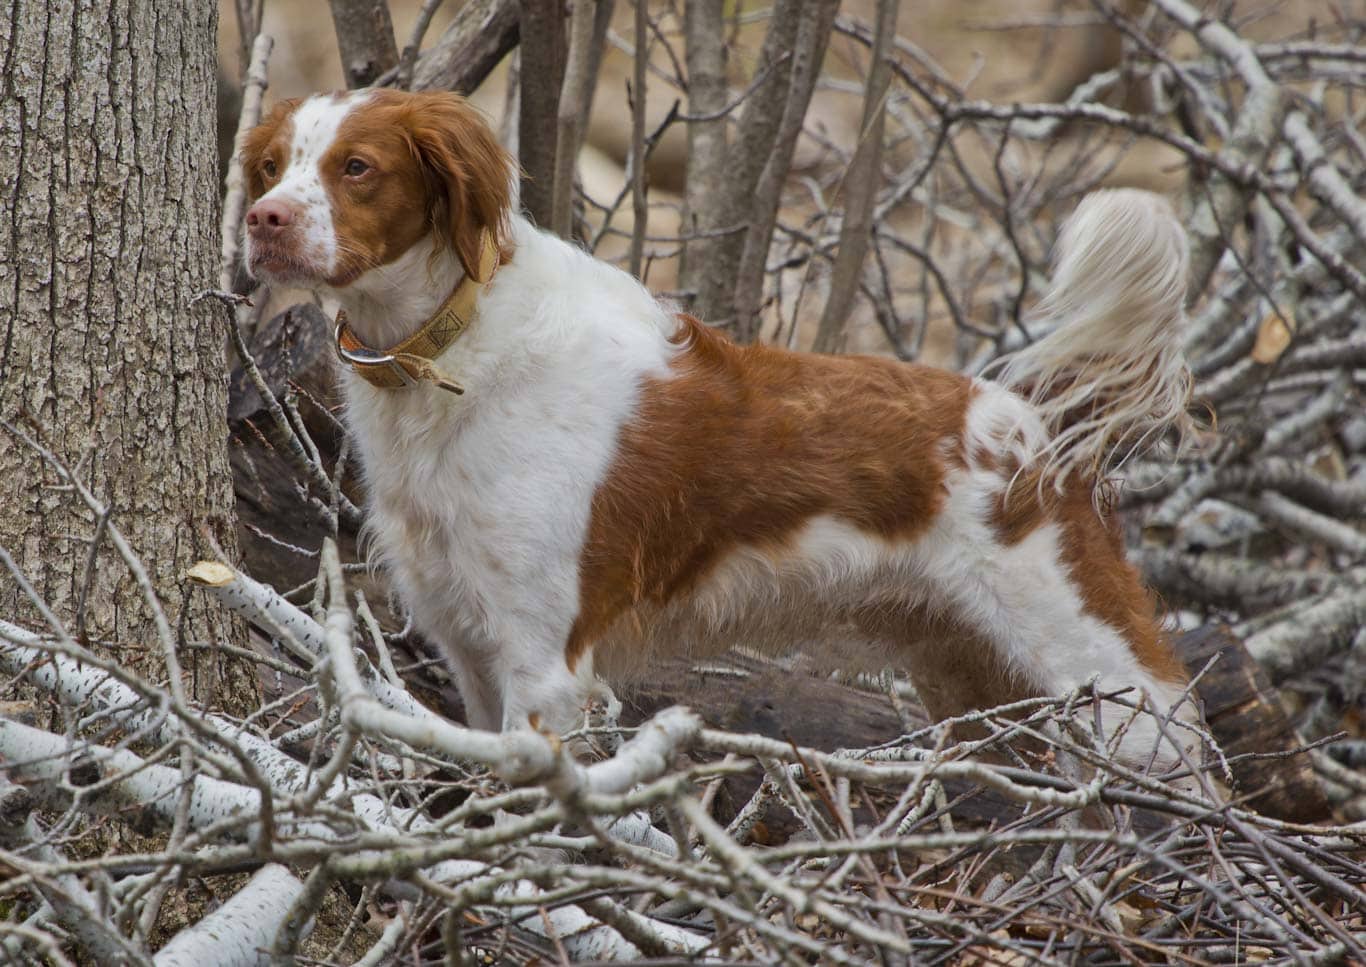 A Brittany dog breed standing alert in between trees